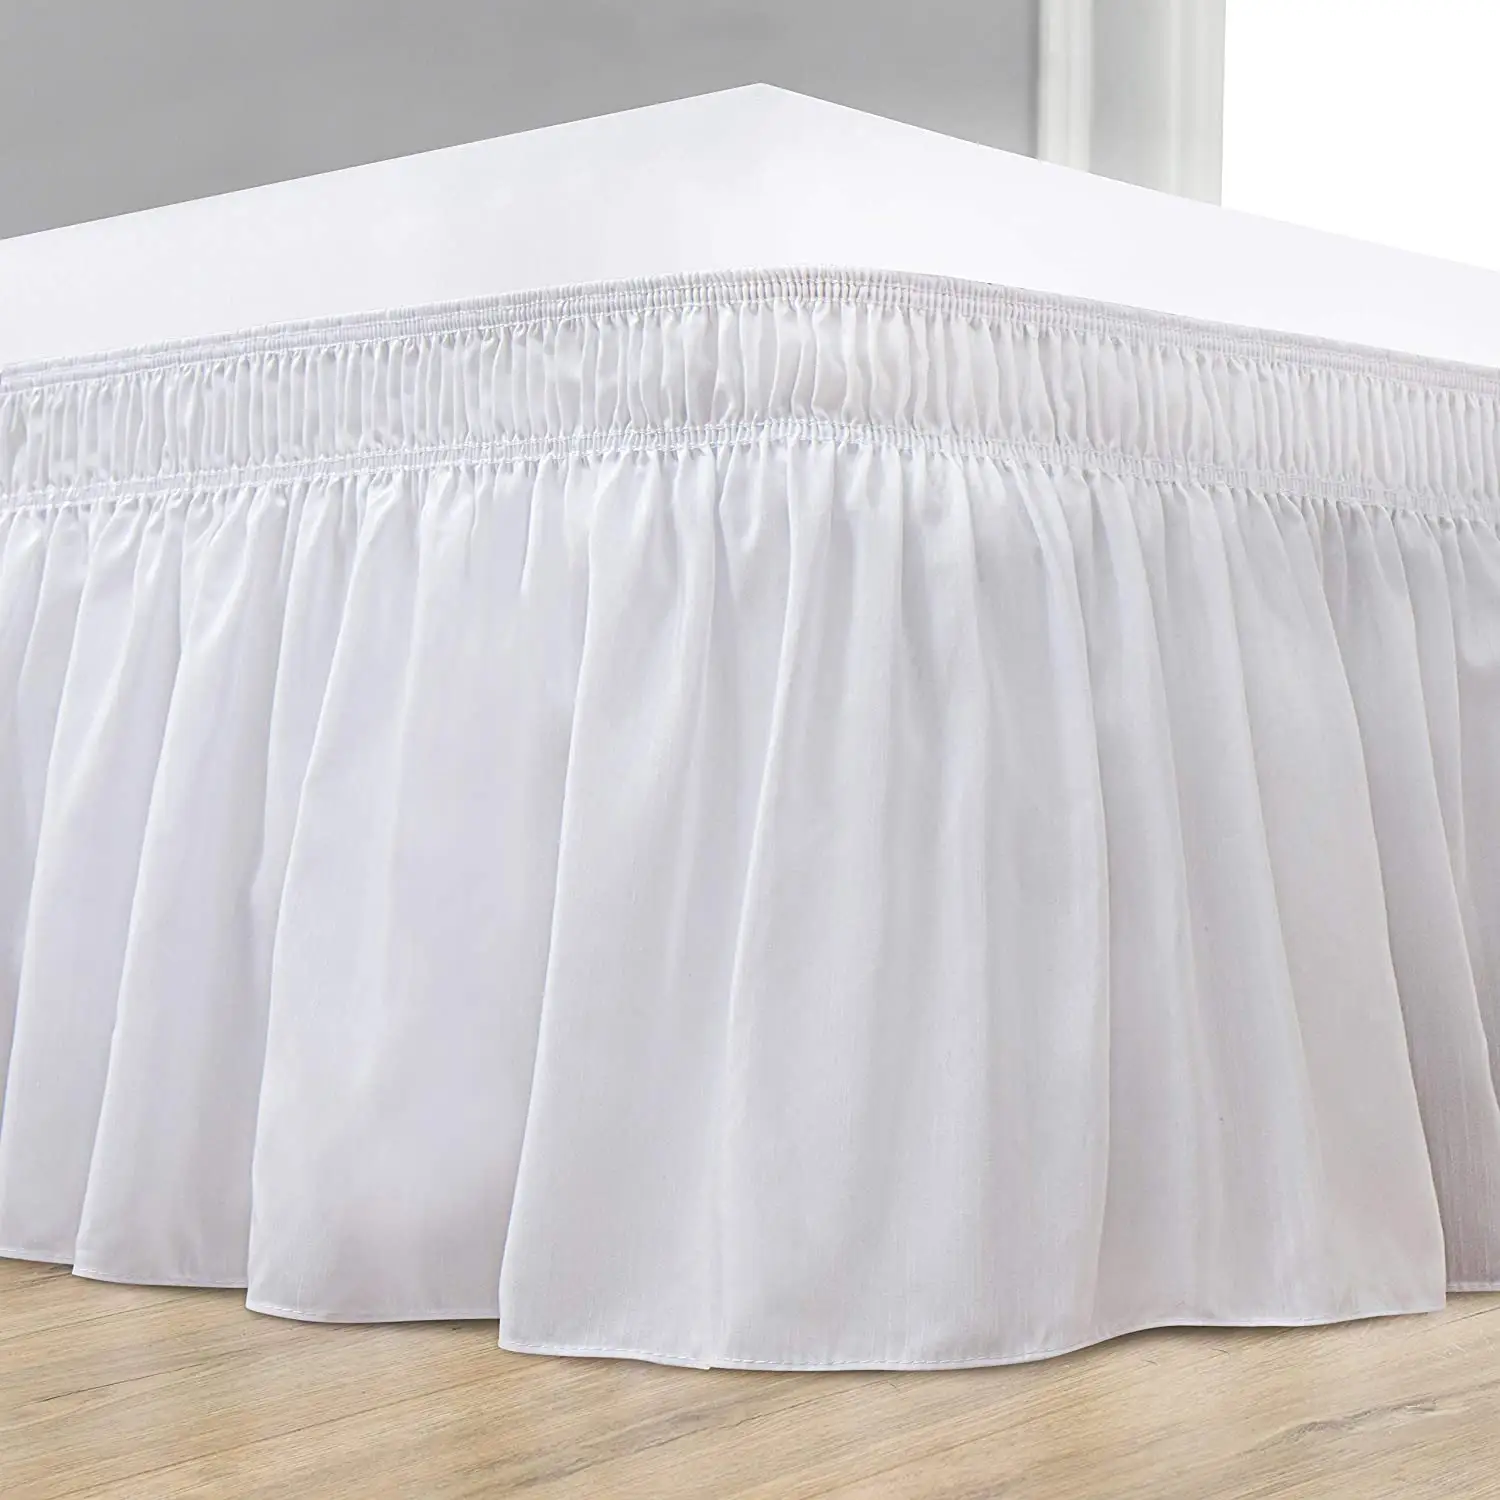 Cheap Custom White Home Hotel 100% Cotton Middle Bedding Ruffle Adjustable Belt Queen Full King Size Bed Skirt